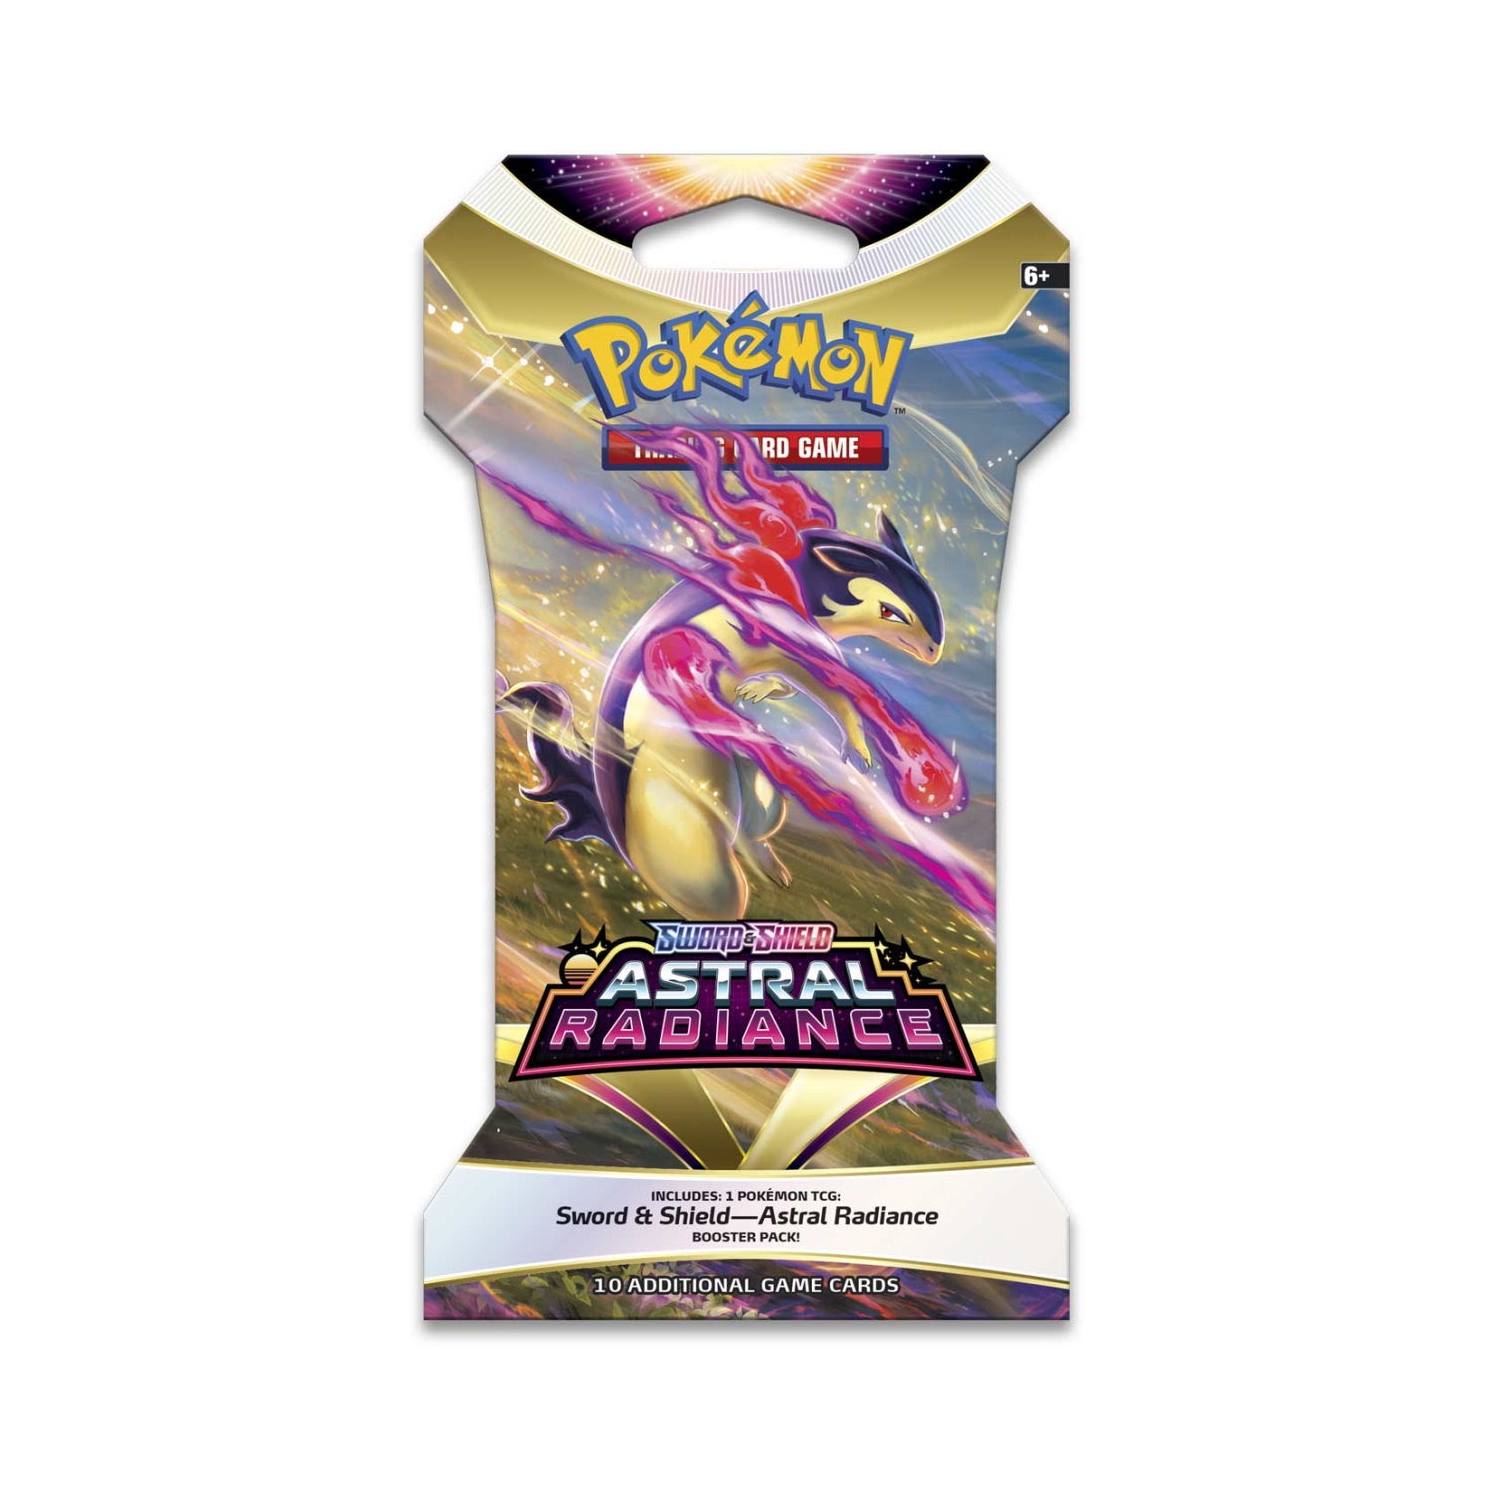 Pokemon TCG: Sword & Shield - Astral Radiance Sleeved Booster Pack [Card Game, 2 Players]